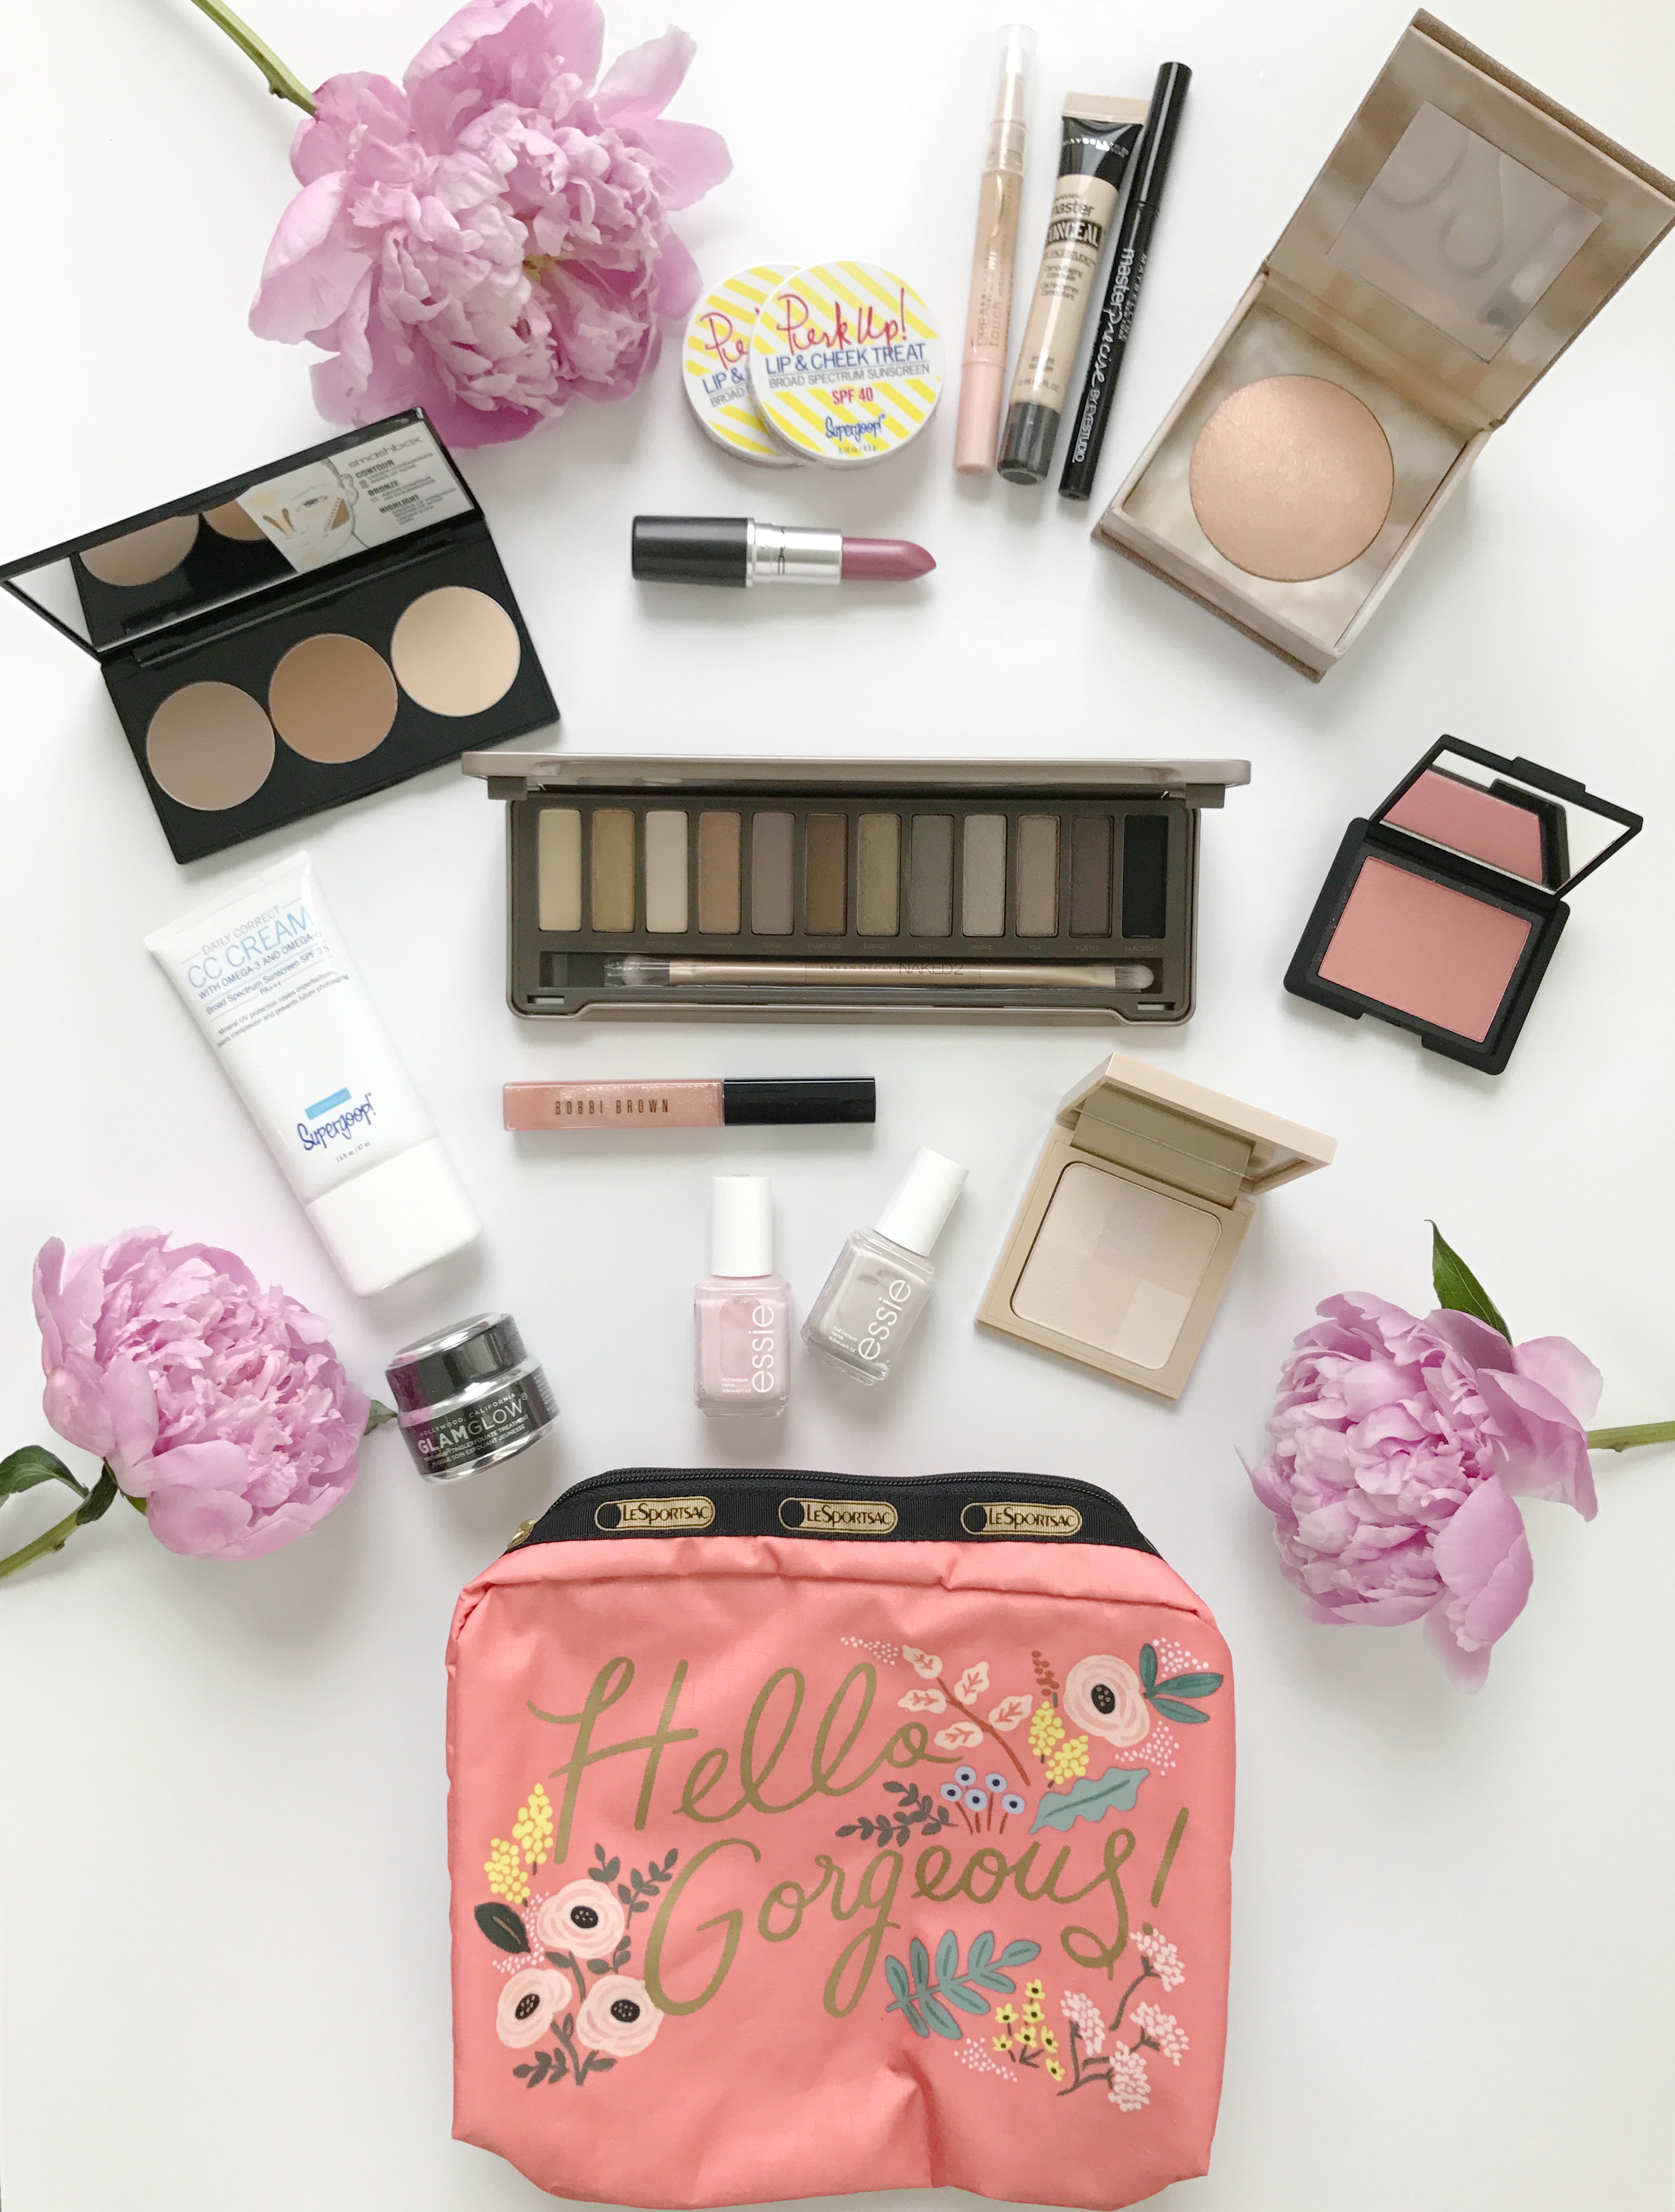 The Ultimate Makeup Giveaway!